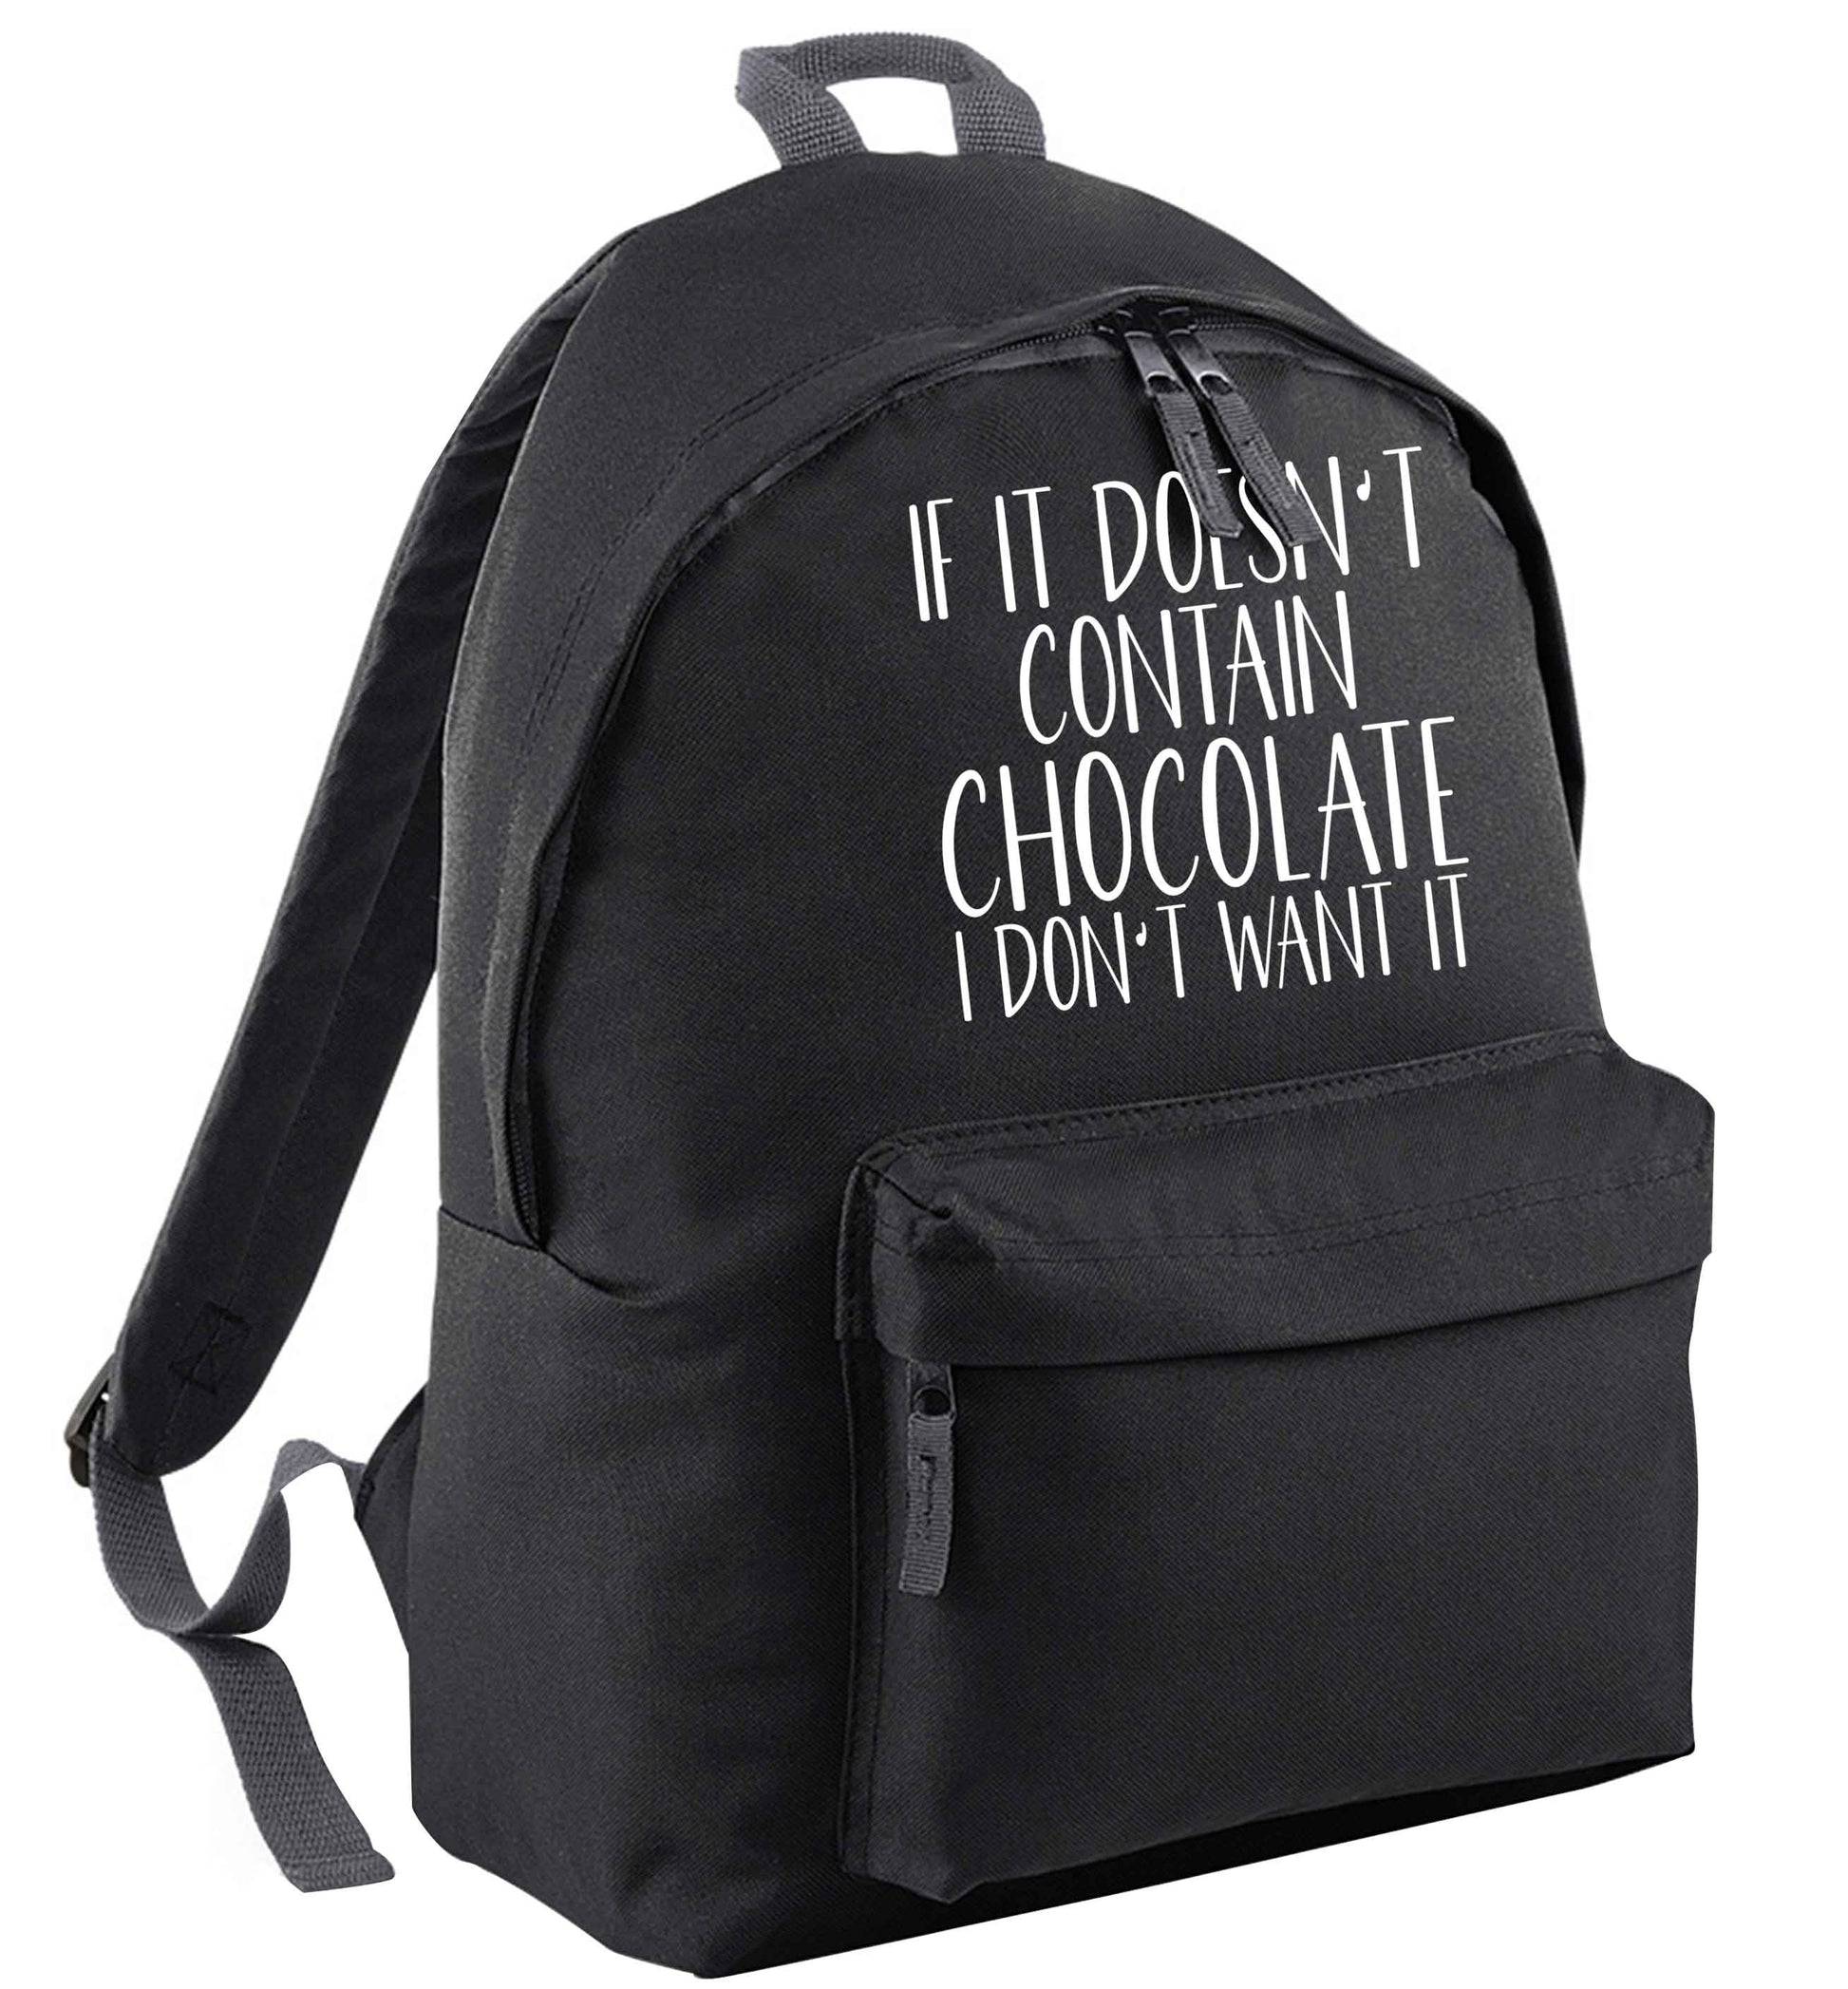 If it doesn't contain chocolate I don't want it black adults backpack